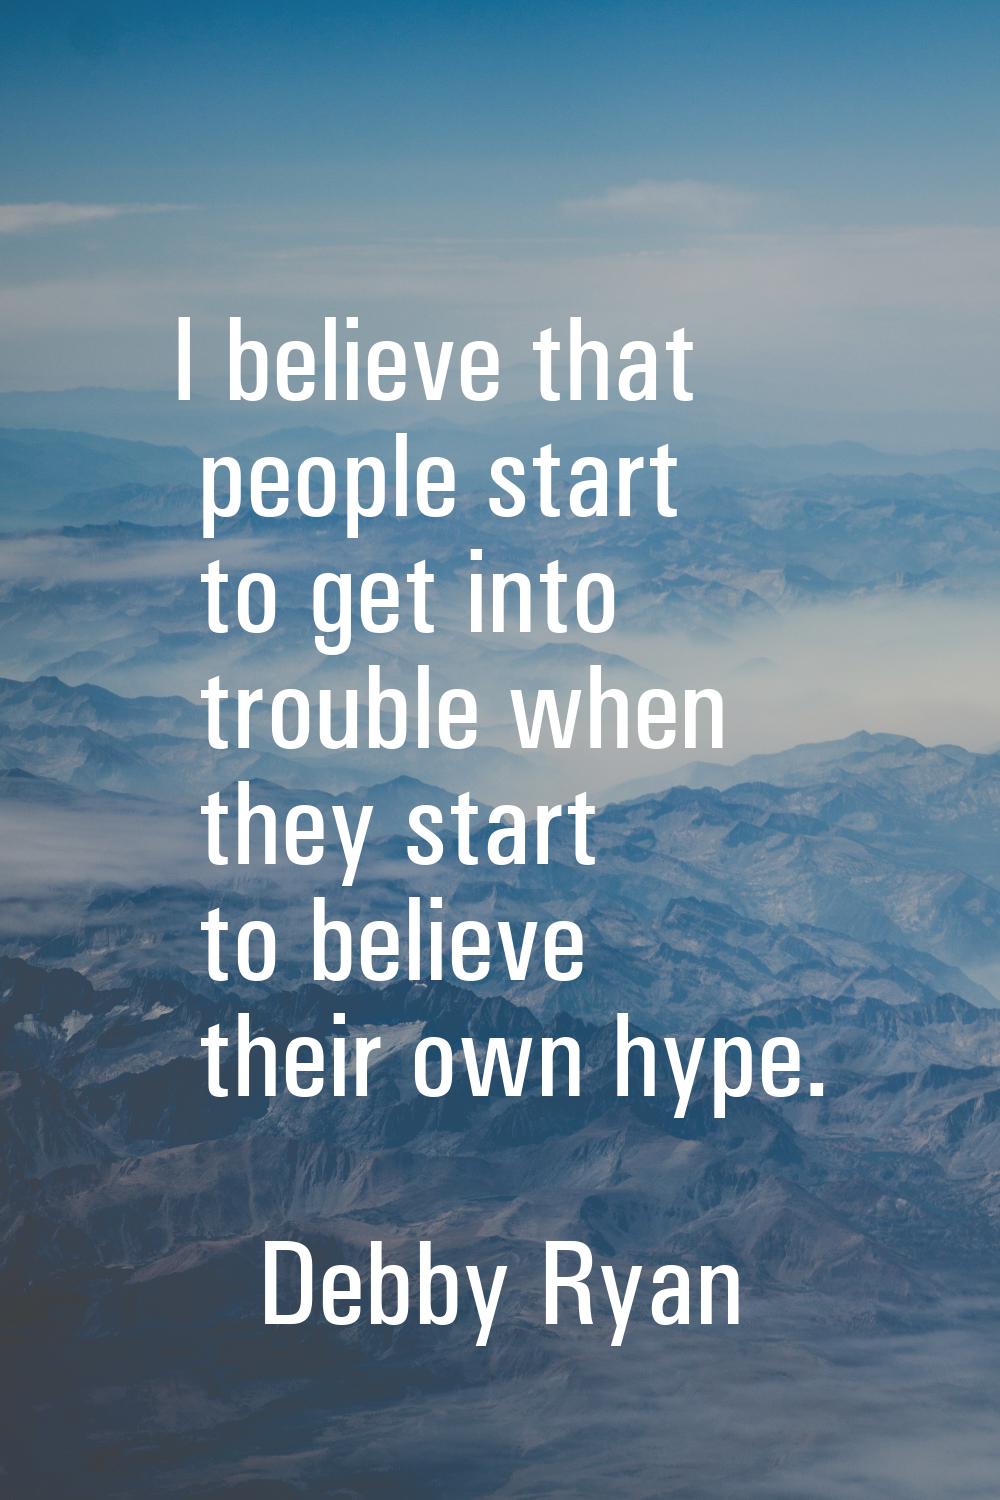 I believe that people start to get into trouble when they start to believe their own hype.